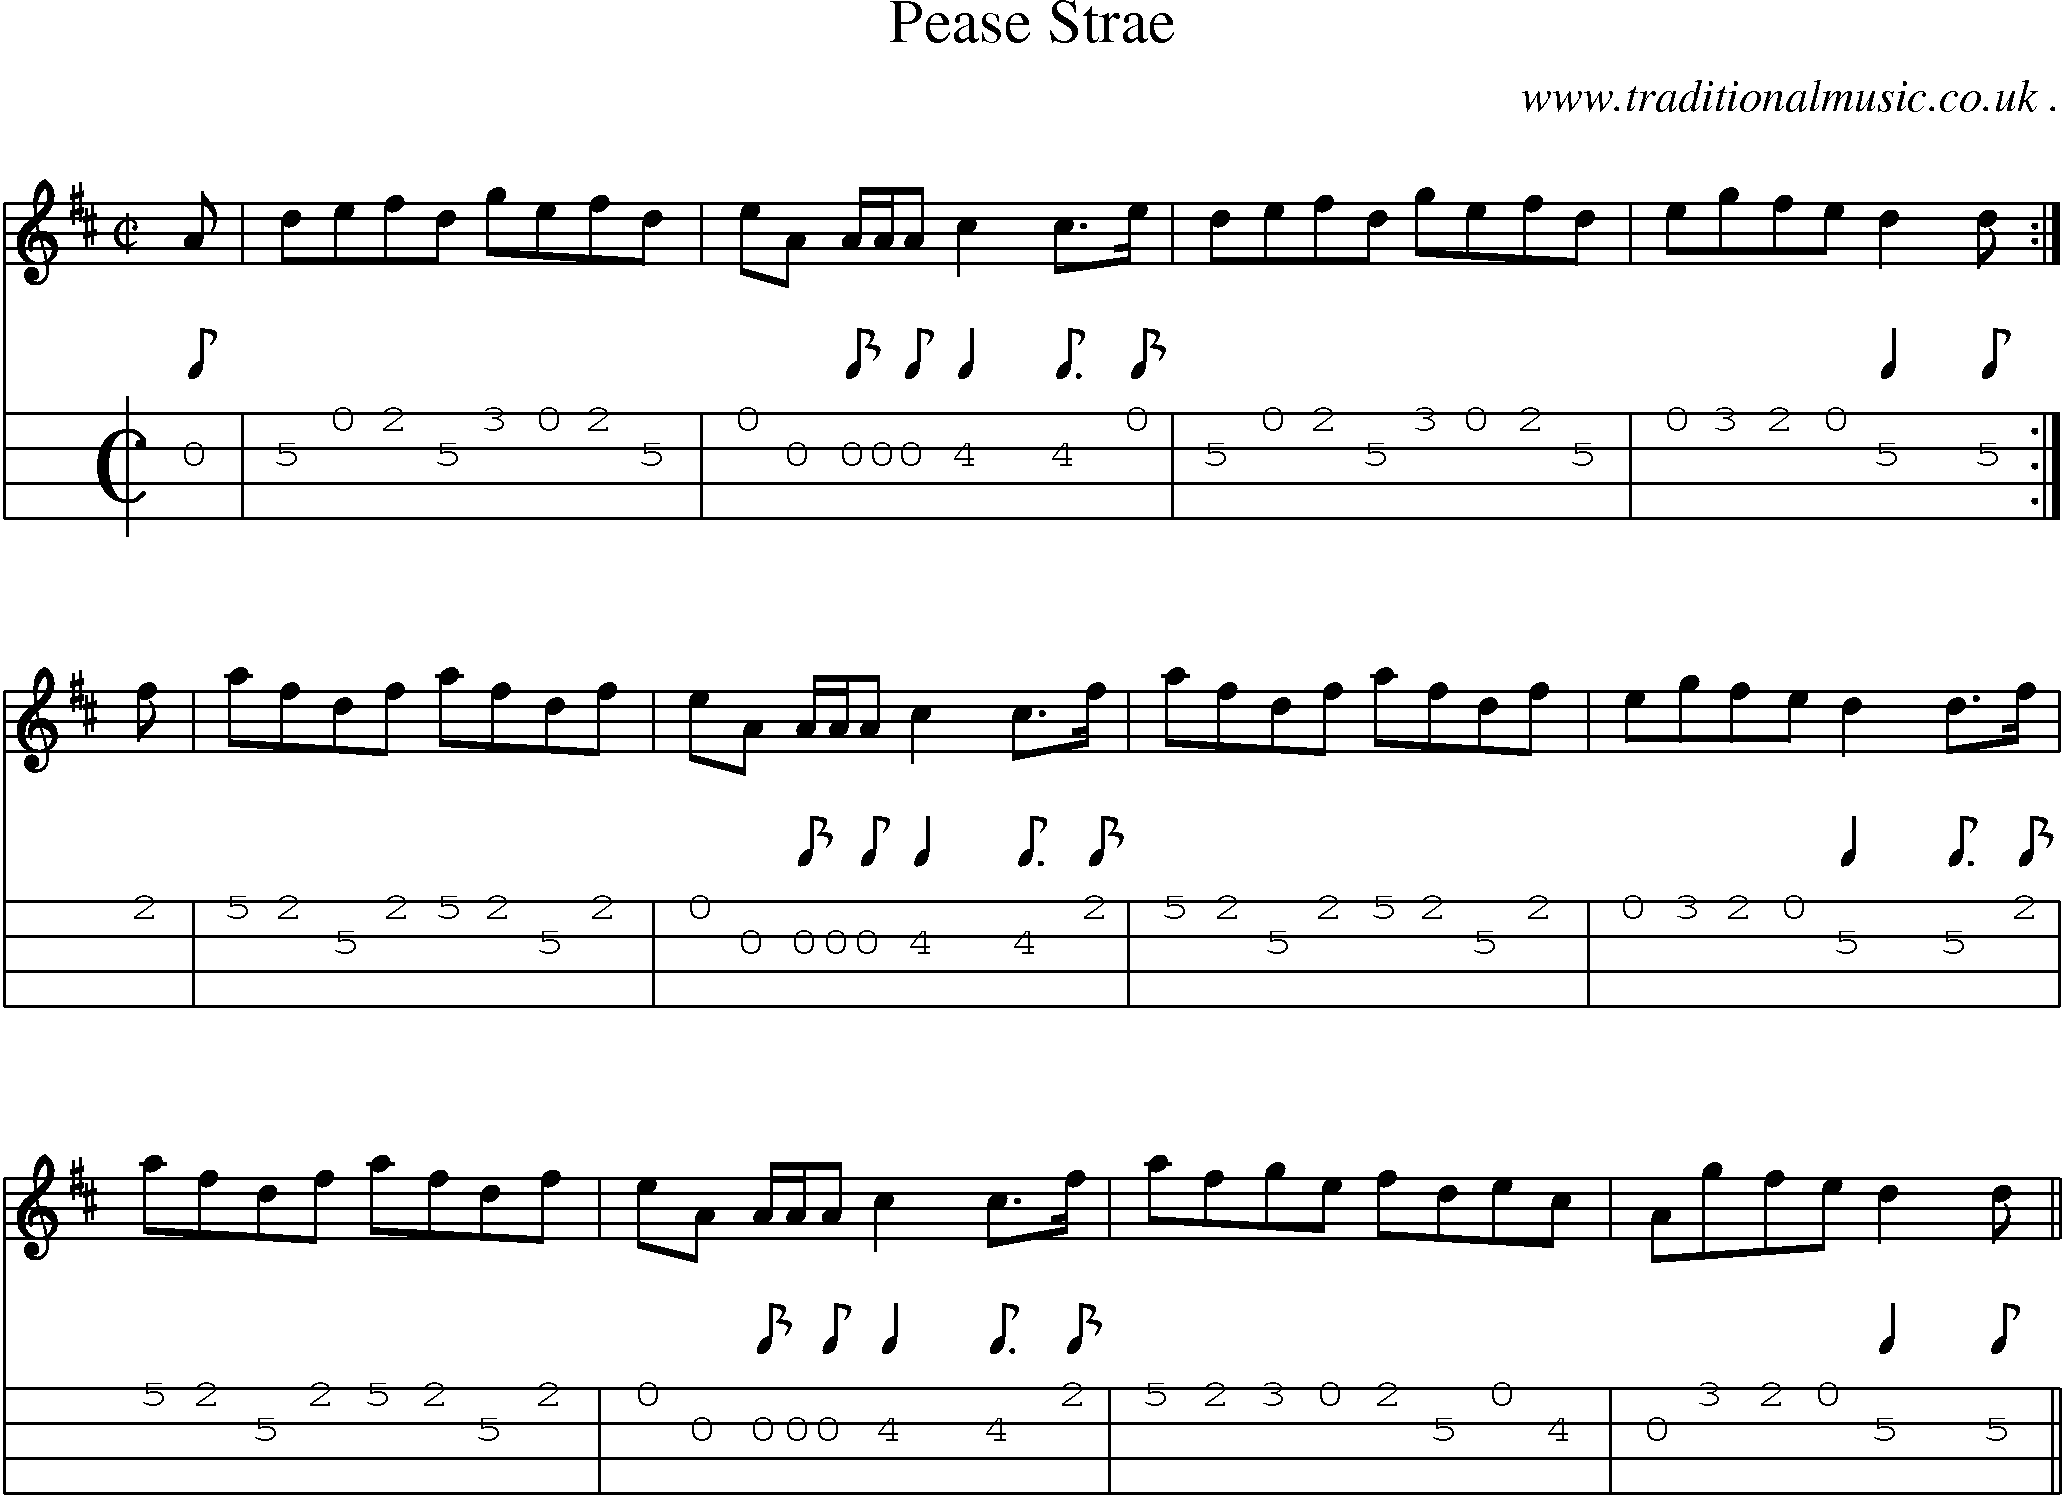 Sheet-music  score, Chords and Mandolin Tabs for Pease Strae